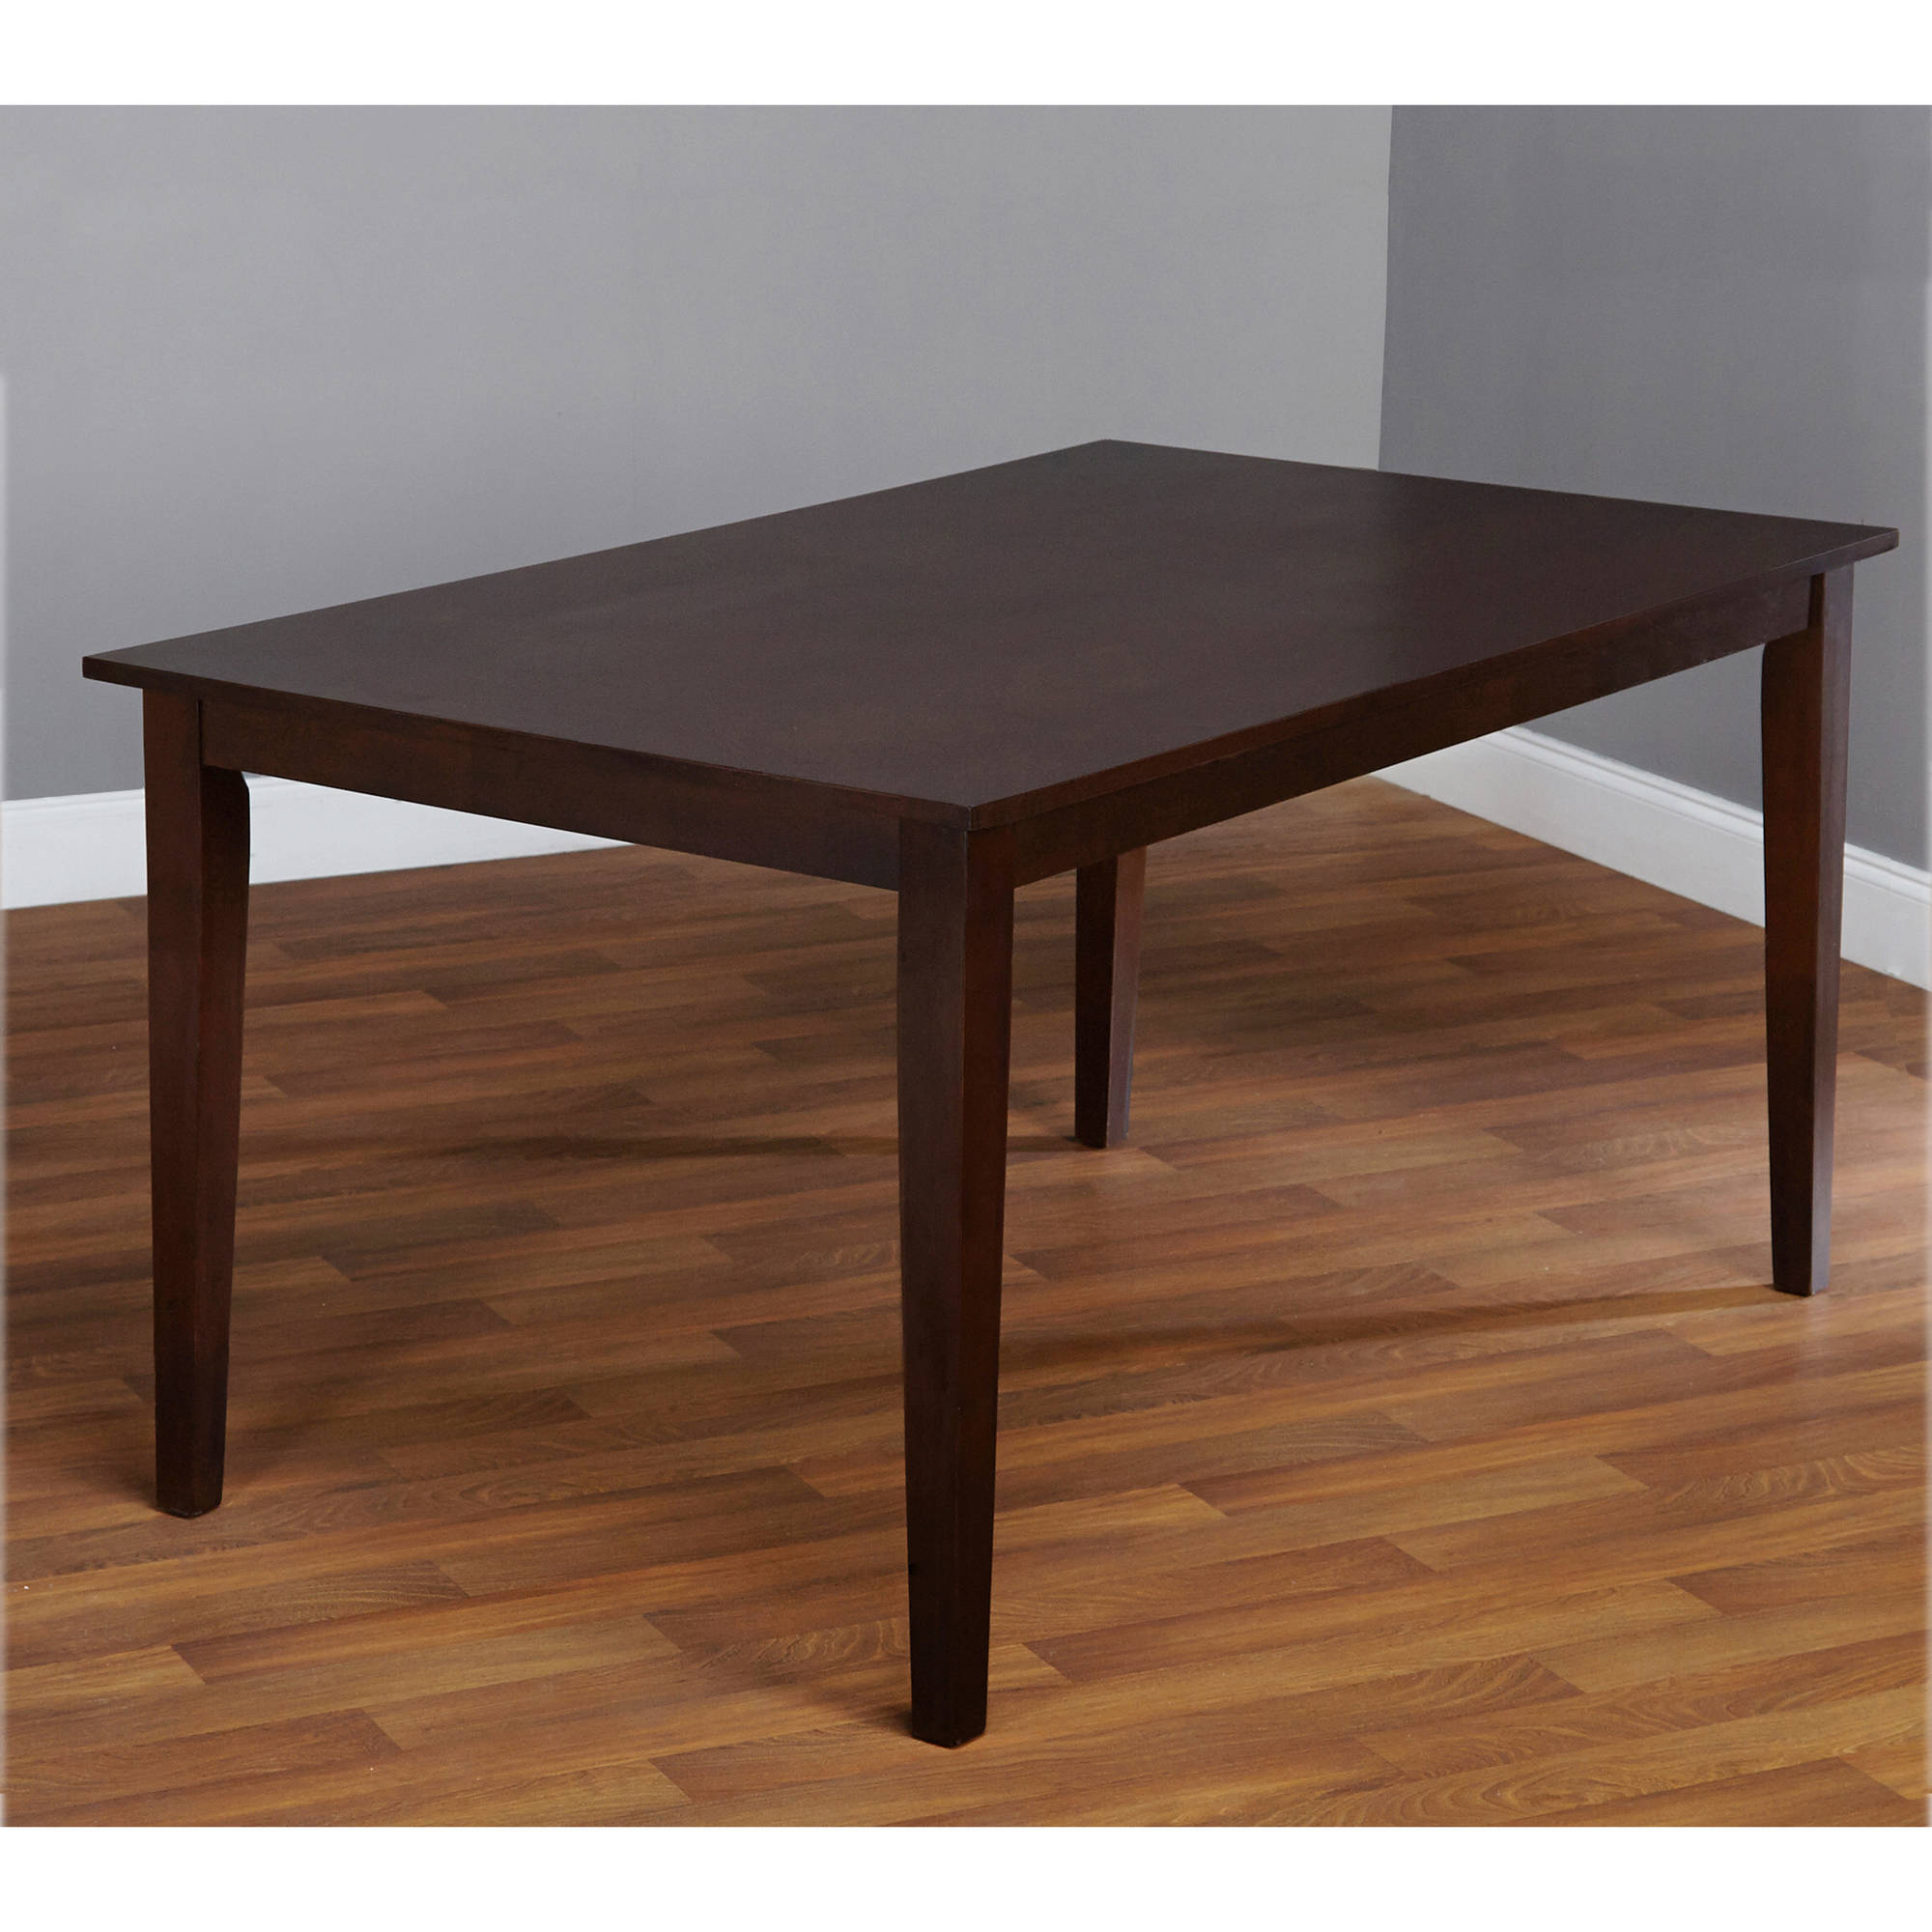 TMS Mid-Century 60" Indoor Dining Table, Espresso - image 2 of 6